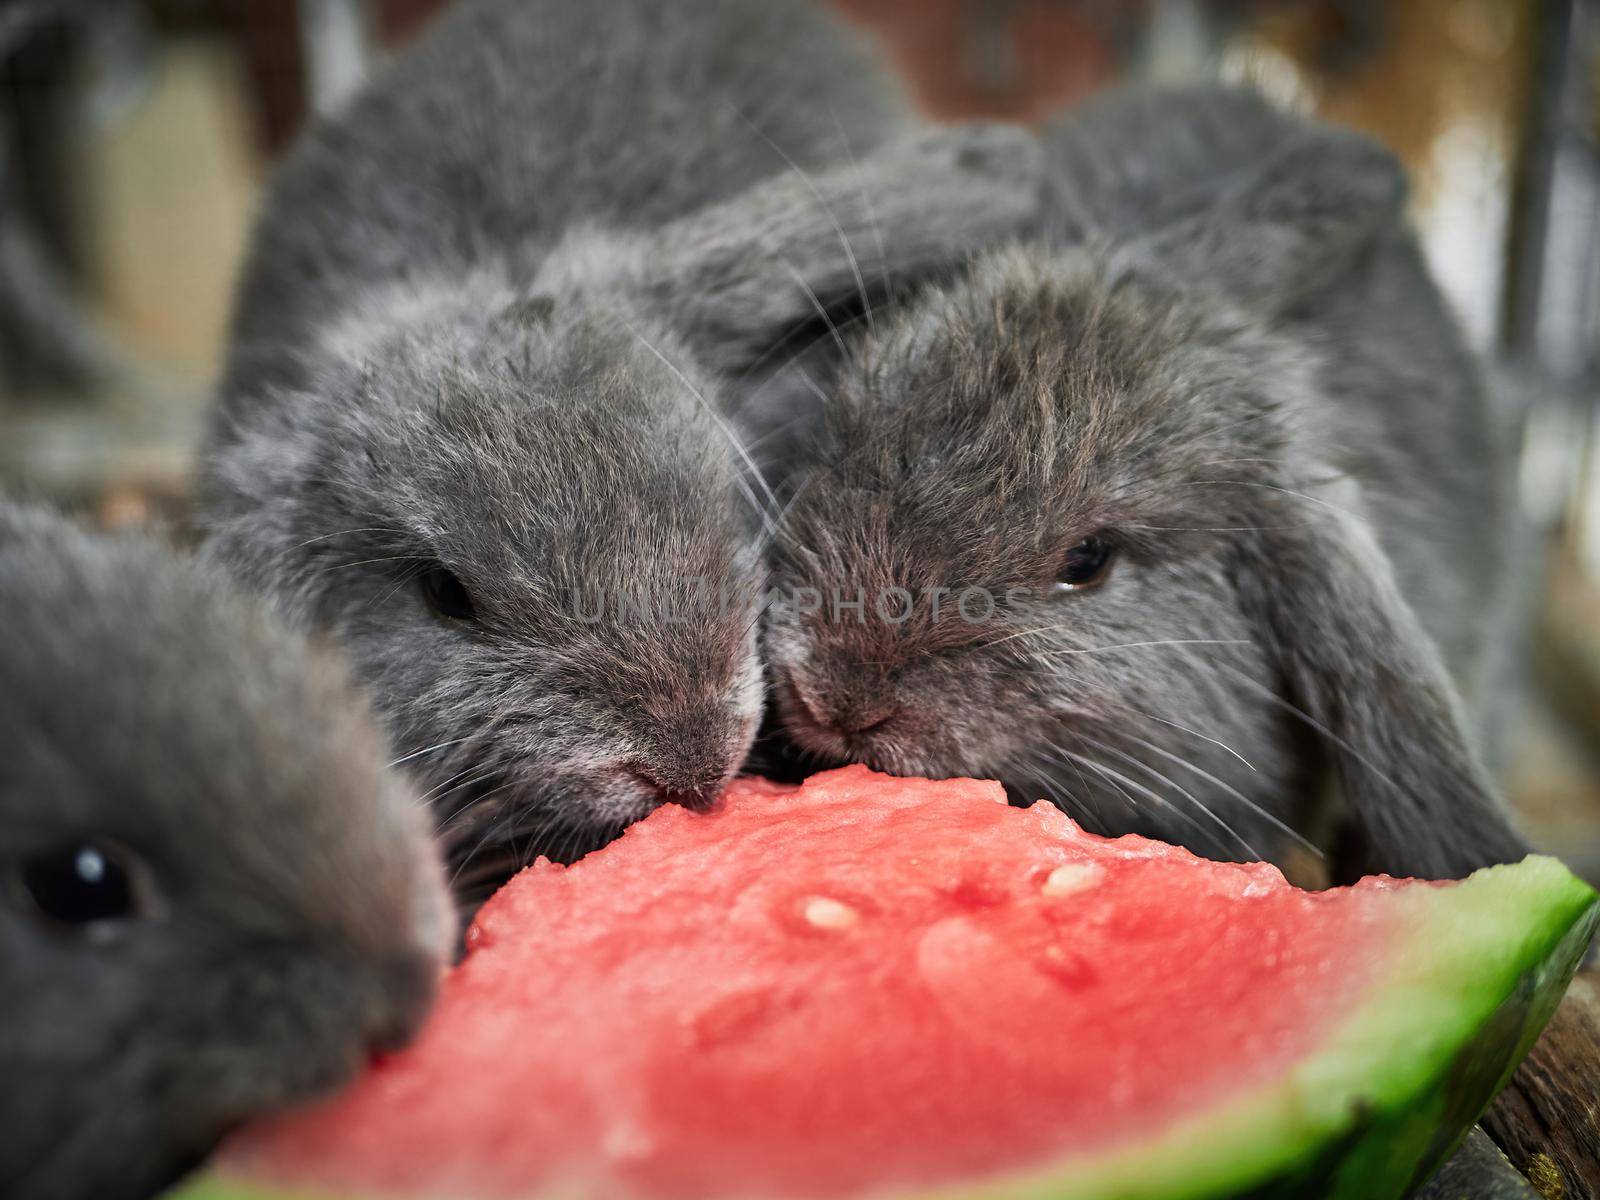 Close-up of three little grey rabbits eating watermelon.